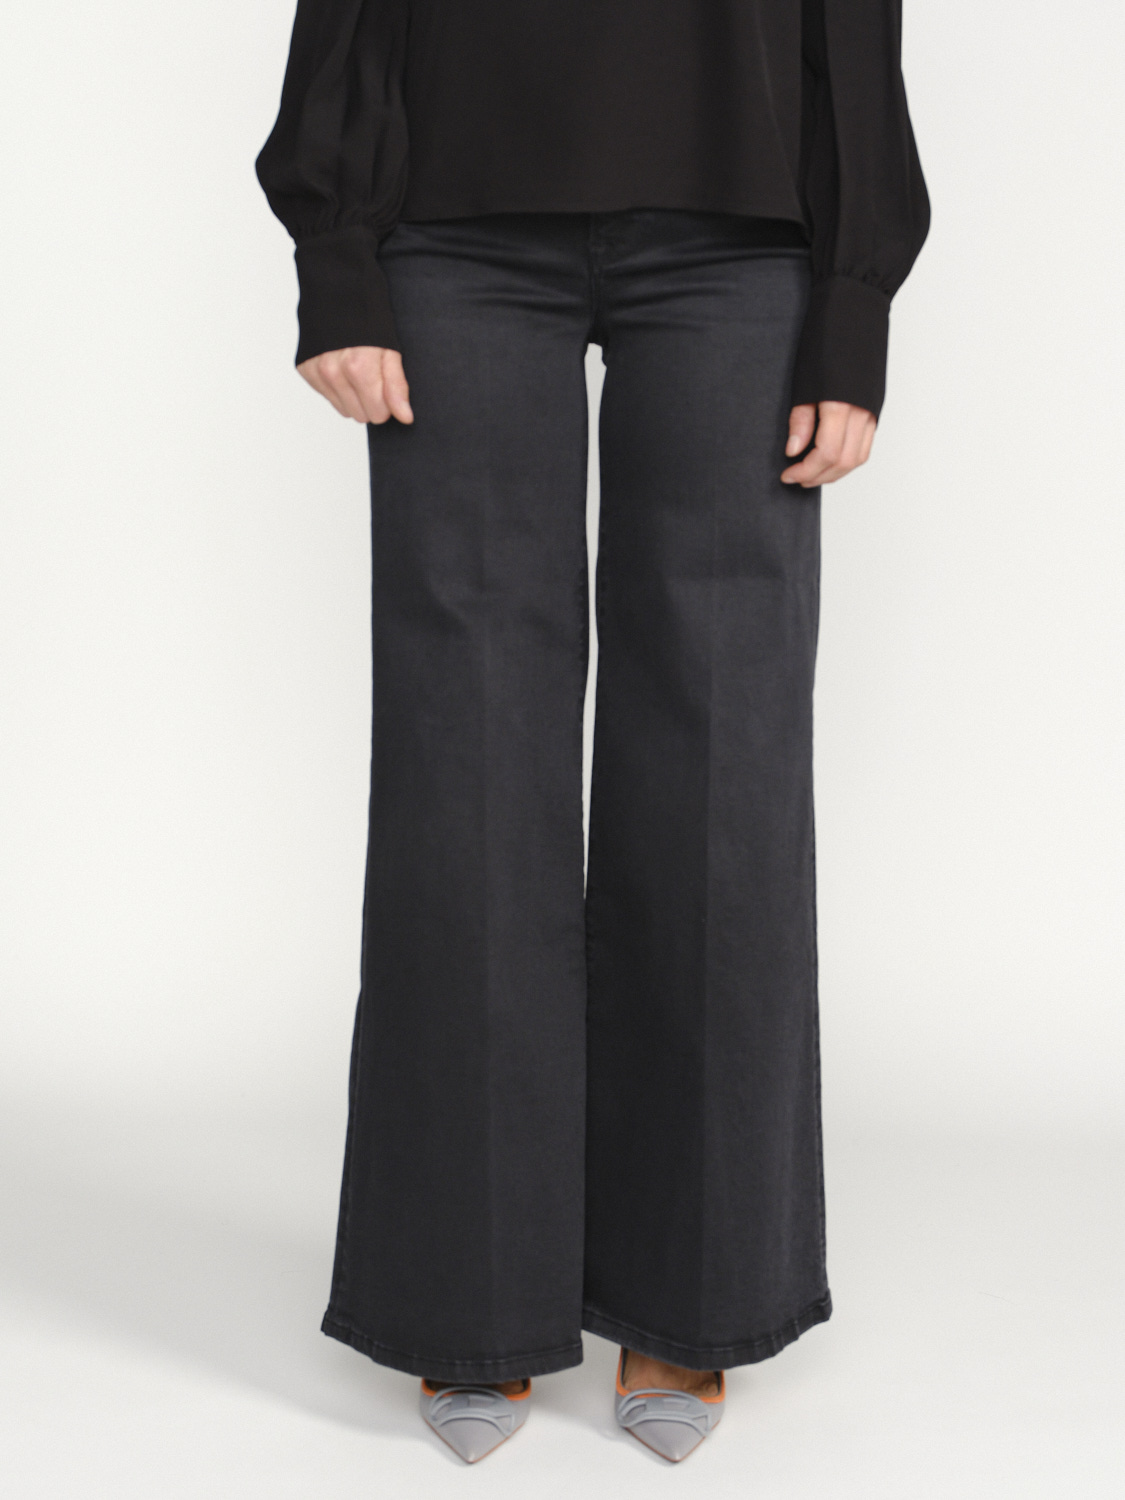 Le Pixie - Jeans trousers with crease